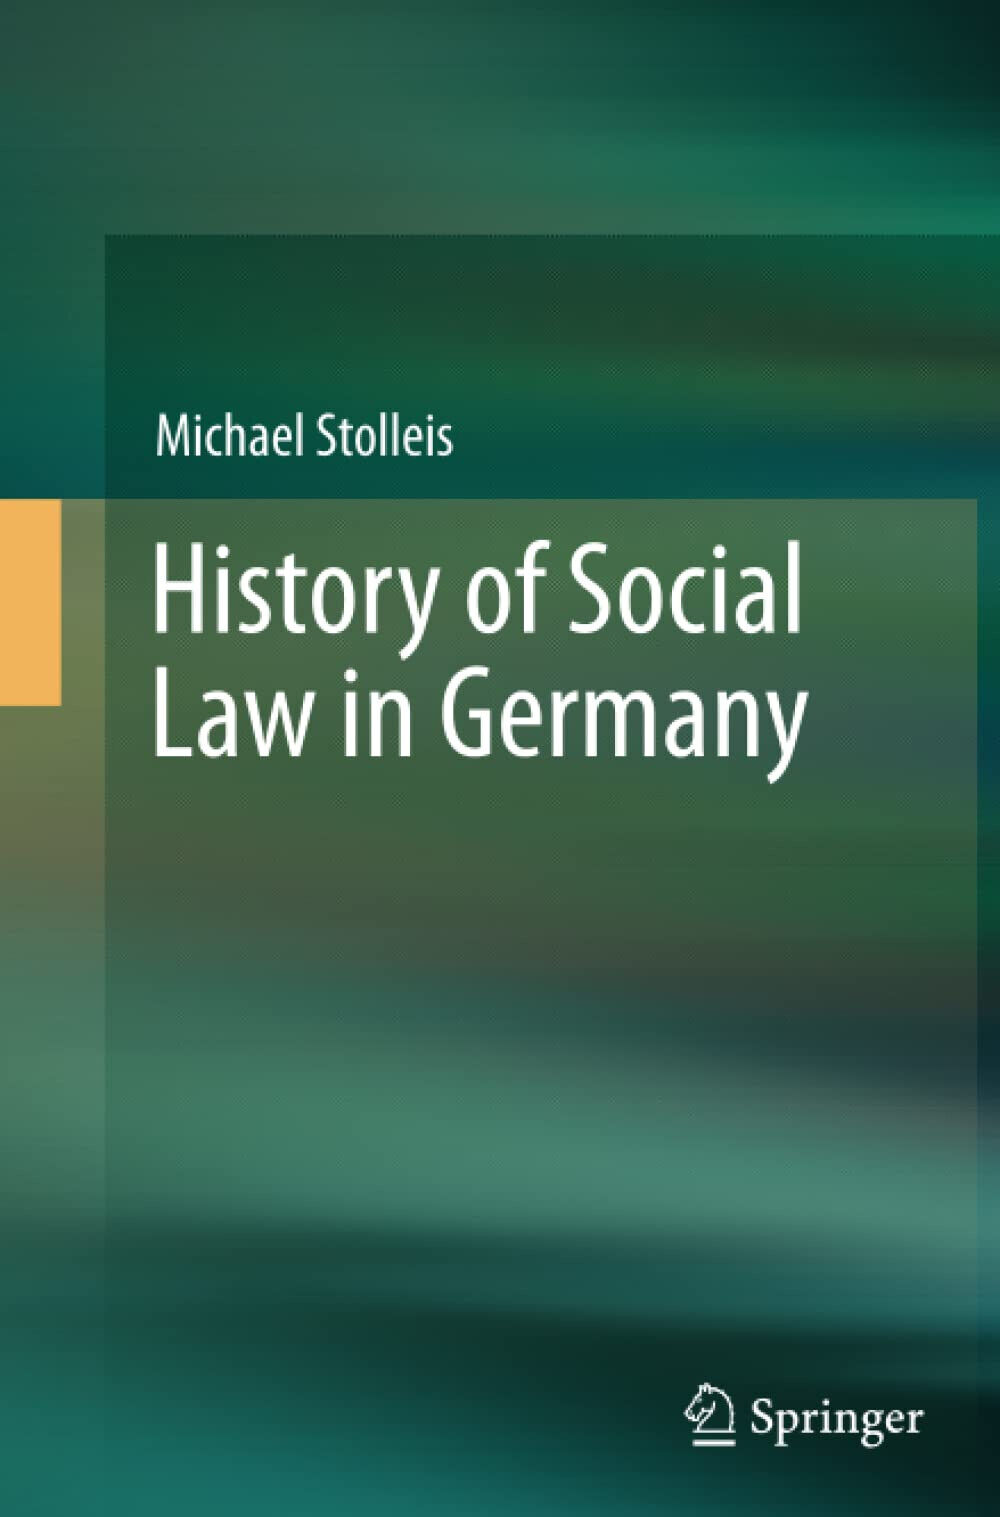 History of Social Law in Germany - Michael Stolleis - Springer, 2016